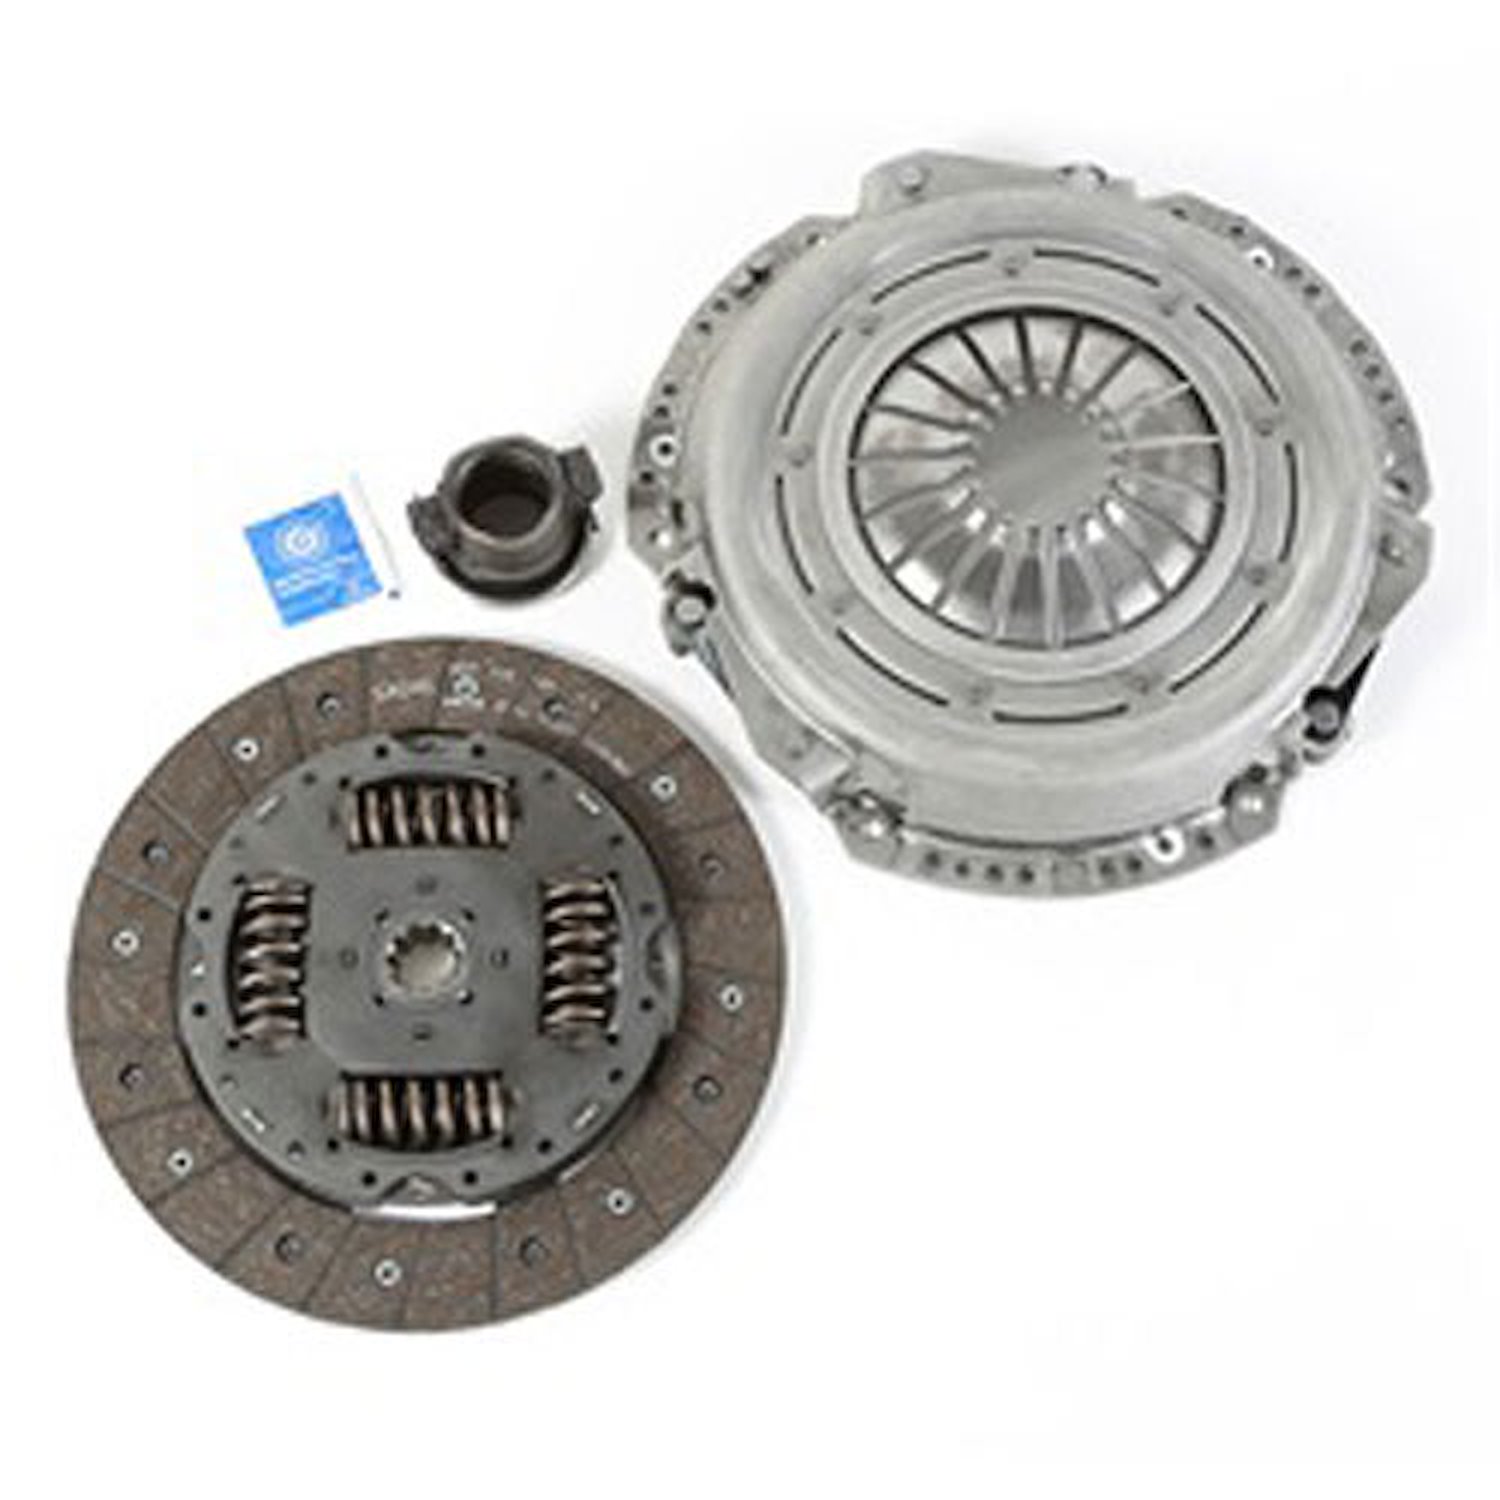 This regular clutch kit from Omix-ADA fits 12-16 Jeep Wrangler models with 3.6L engines